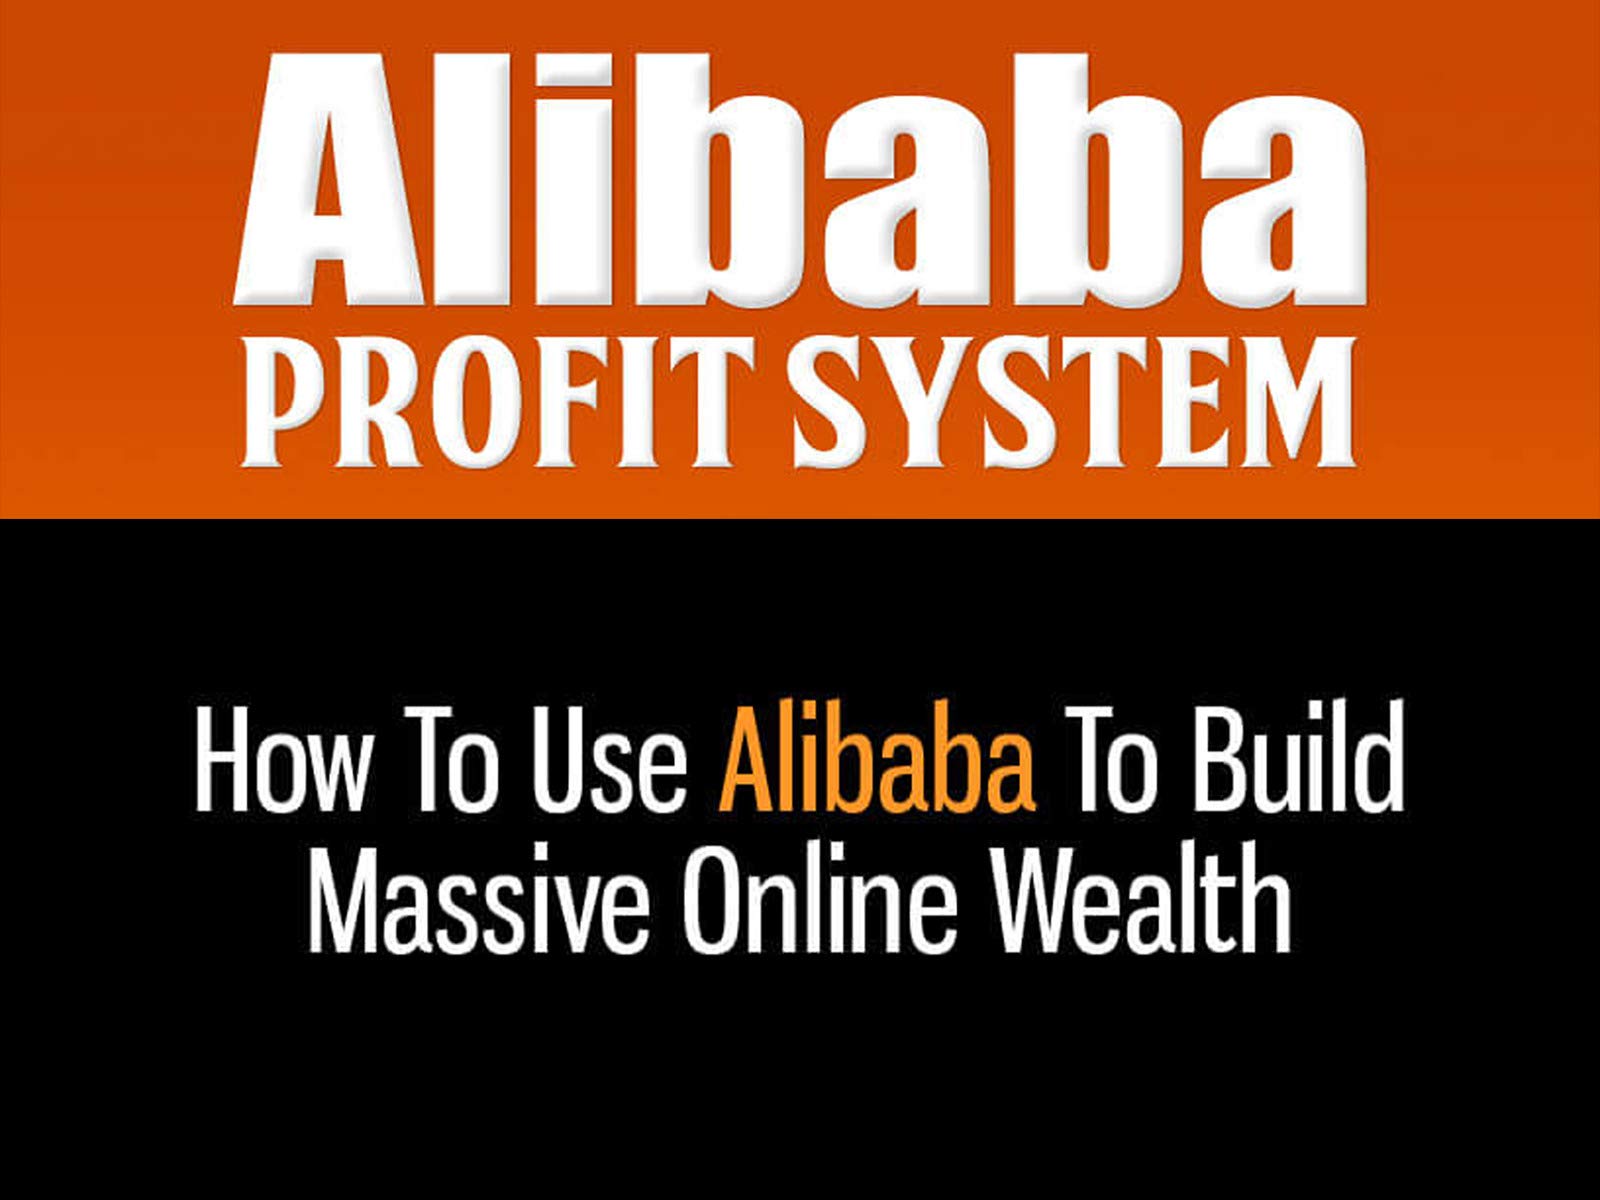 Getting Started with ALIBABA.COM